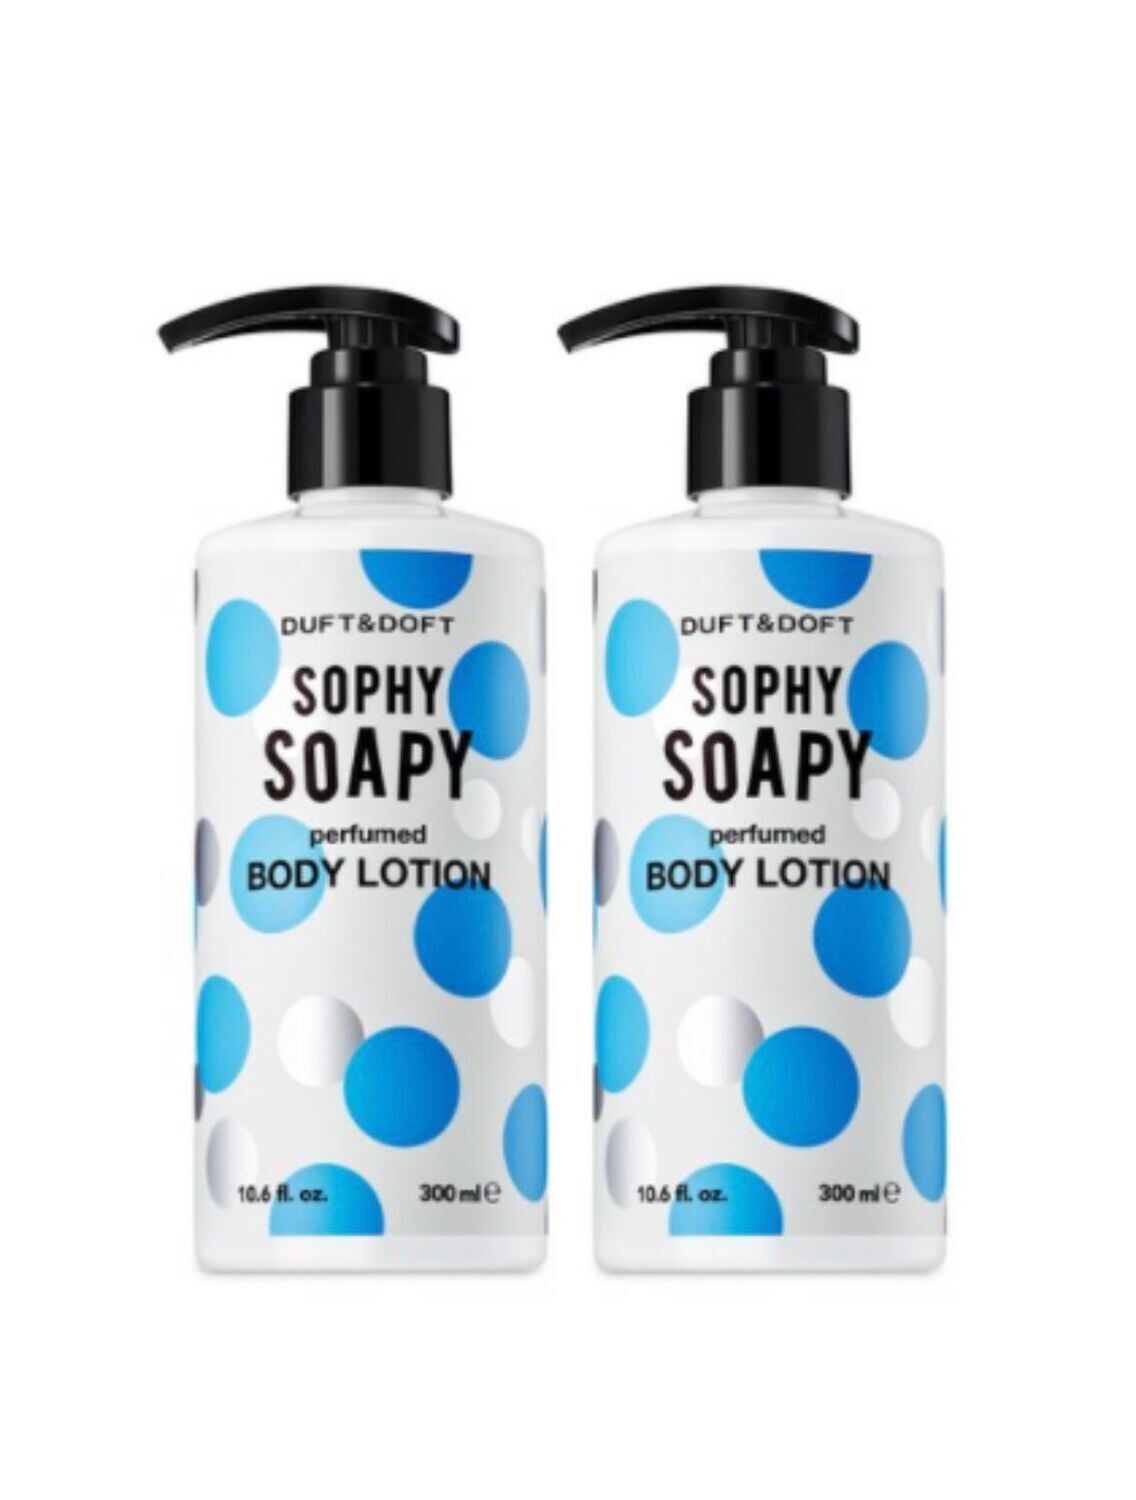 DUFT&DOFT﻿ Sophy Soapy Perfumed Body Lotion 300ml